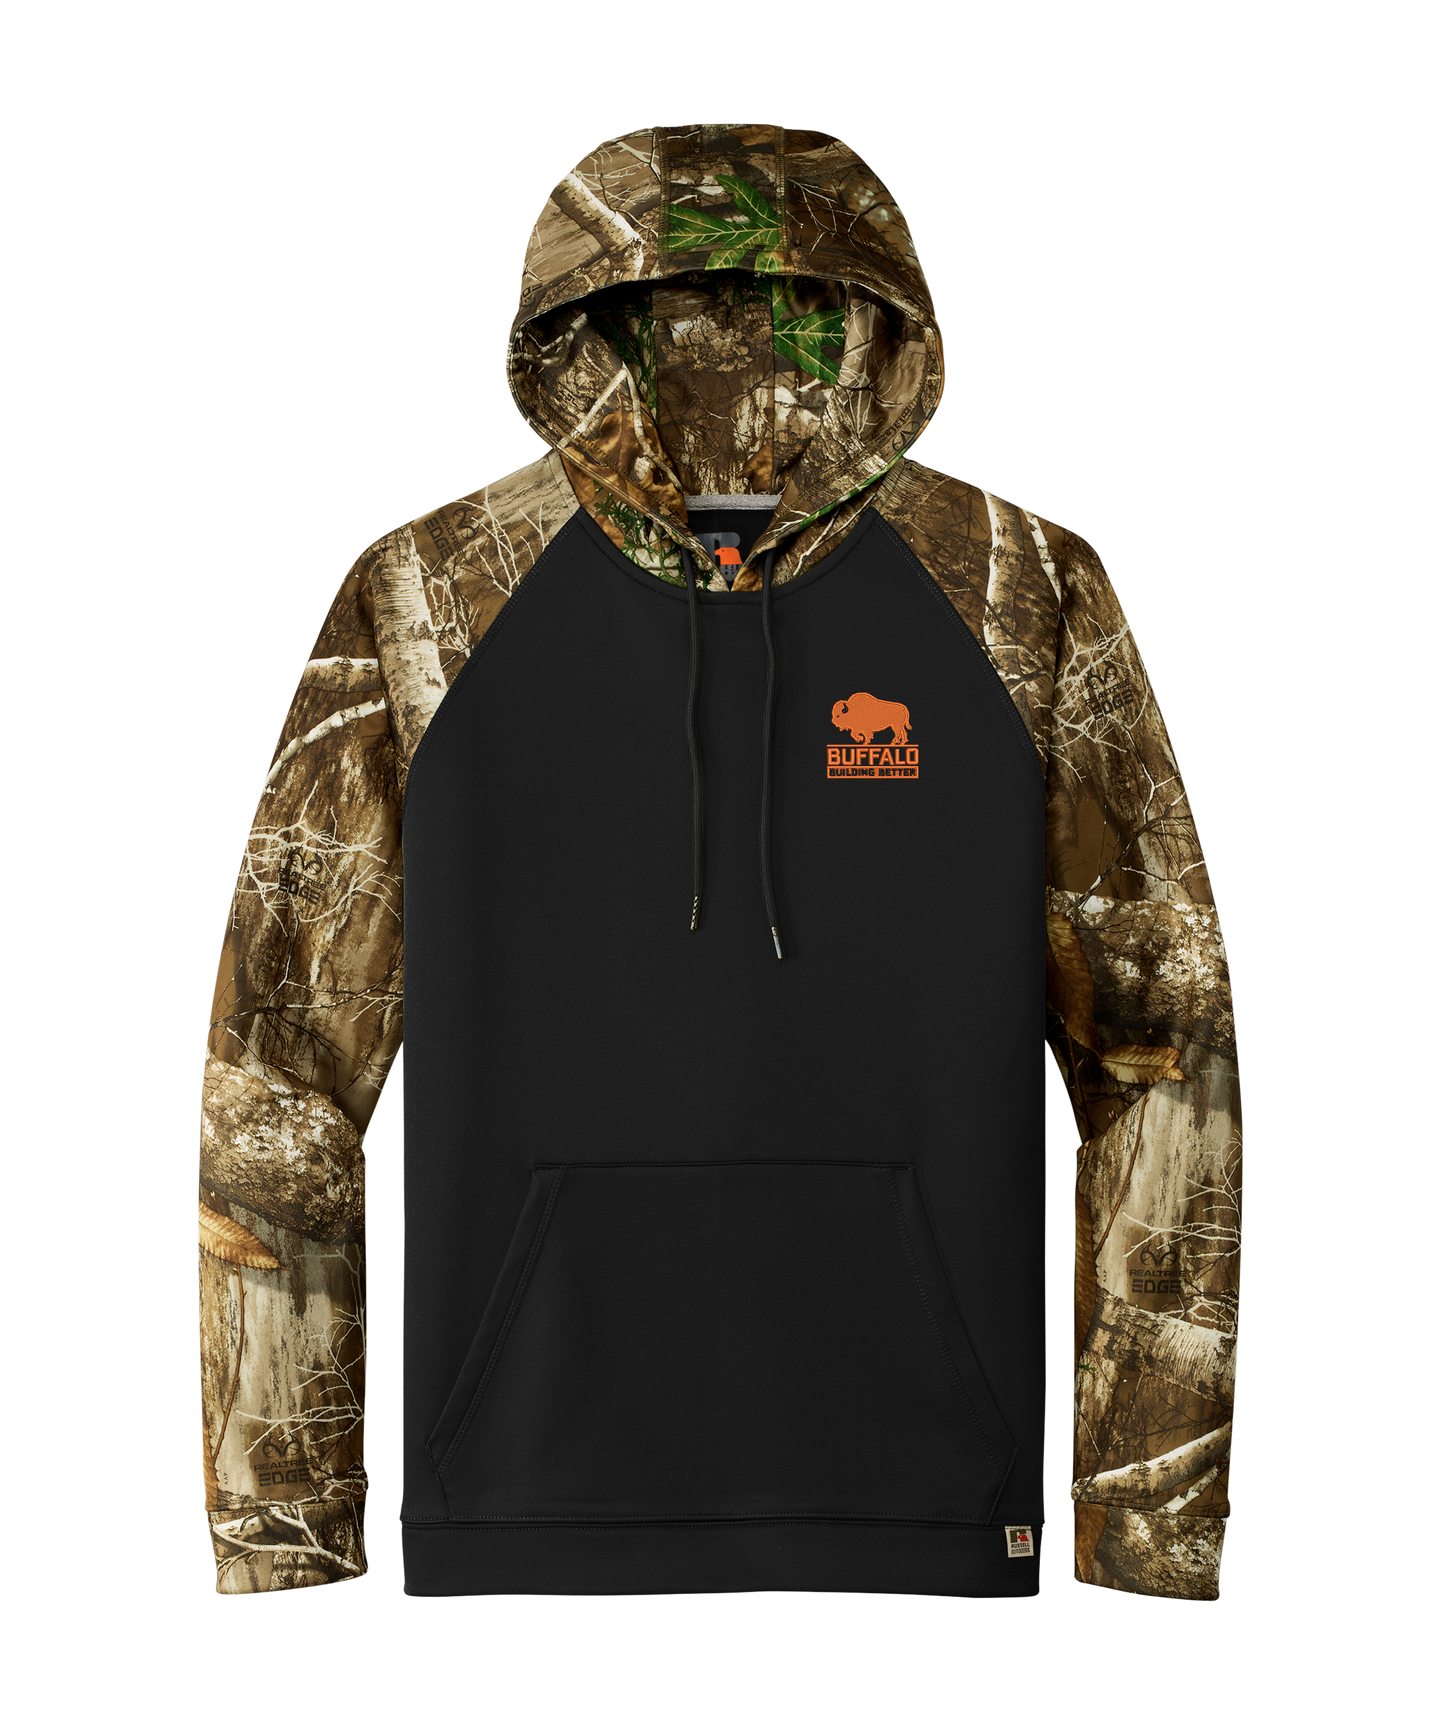 Russell Outdoors™ Realtree® Performance Colorblock Pullover Hoodie